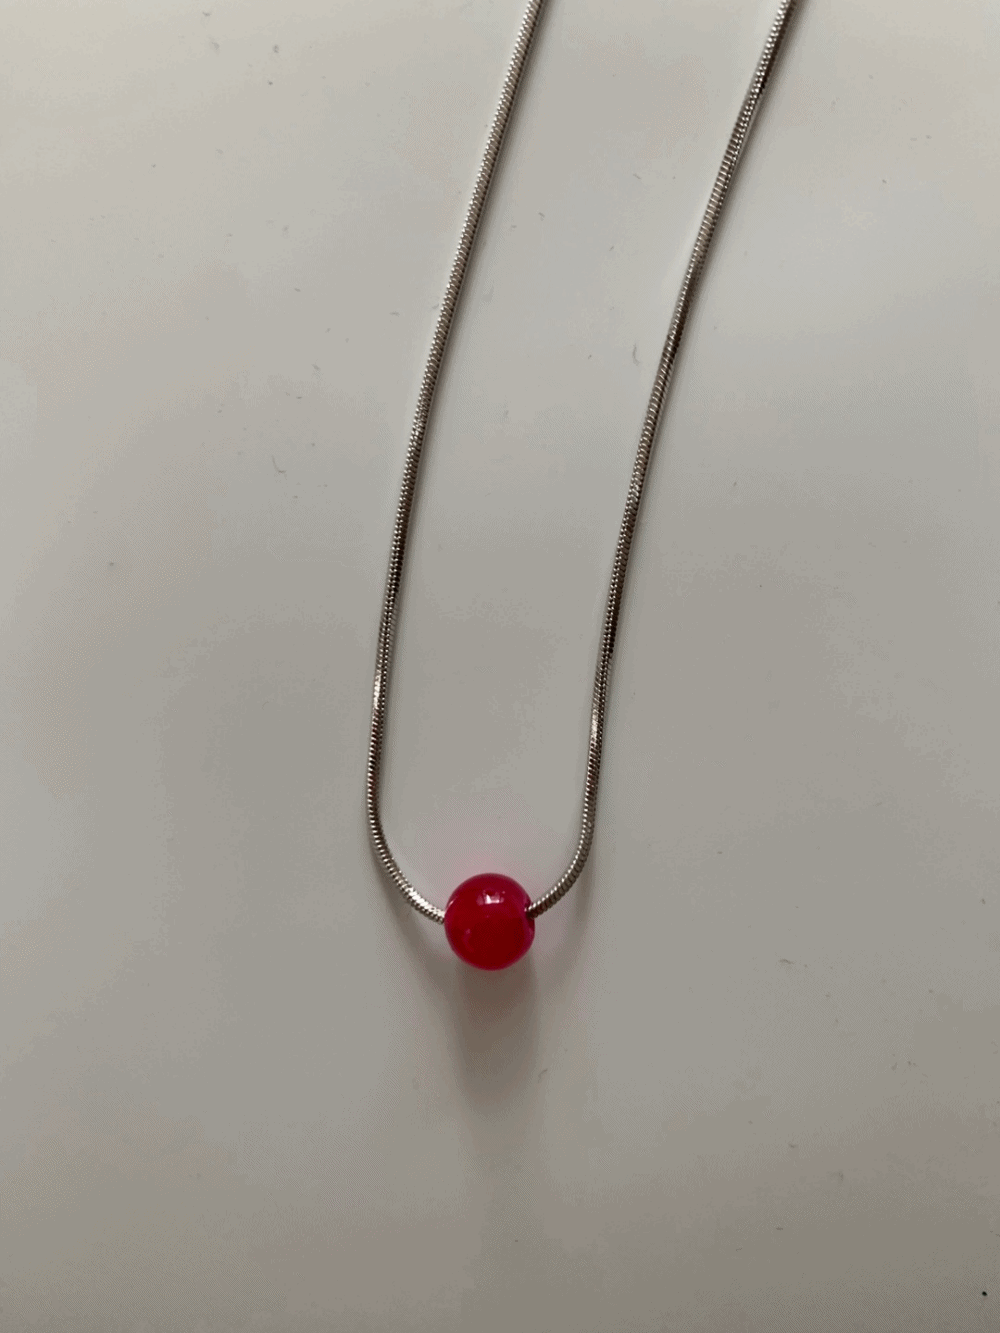 [Acc] Chav stone necklace / one color